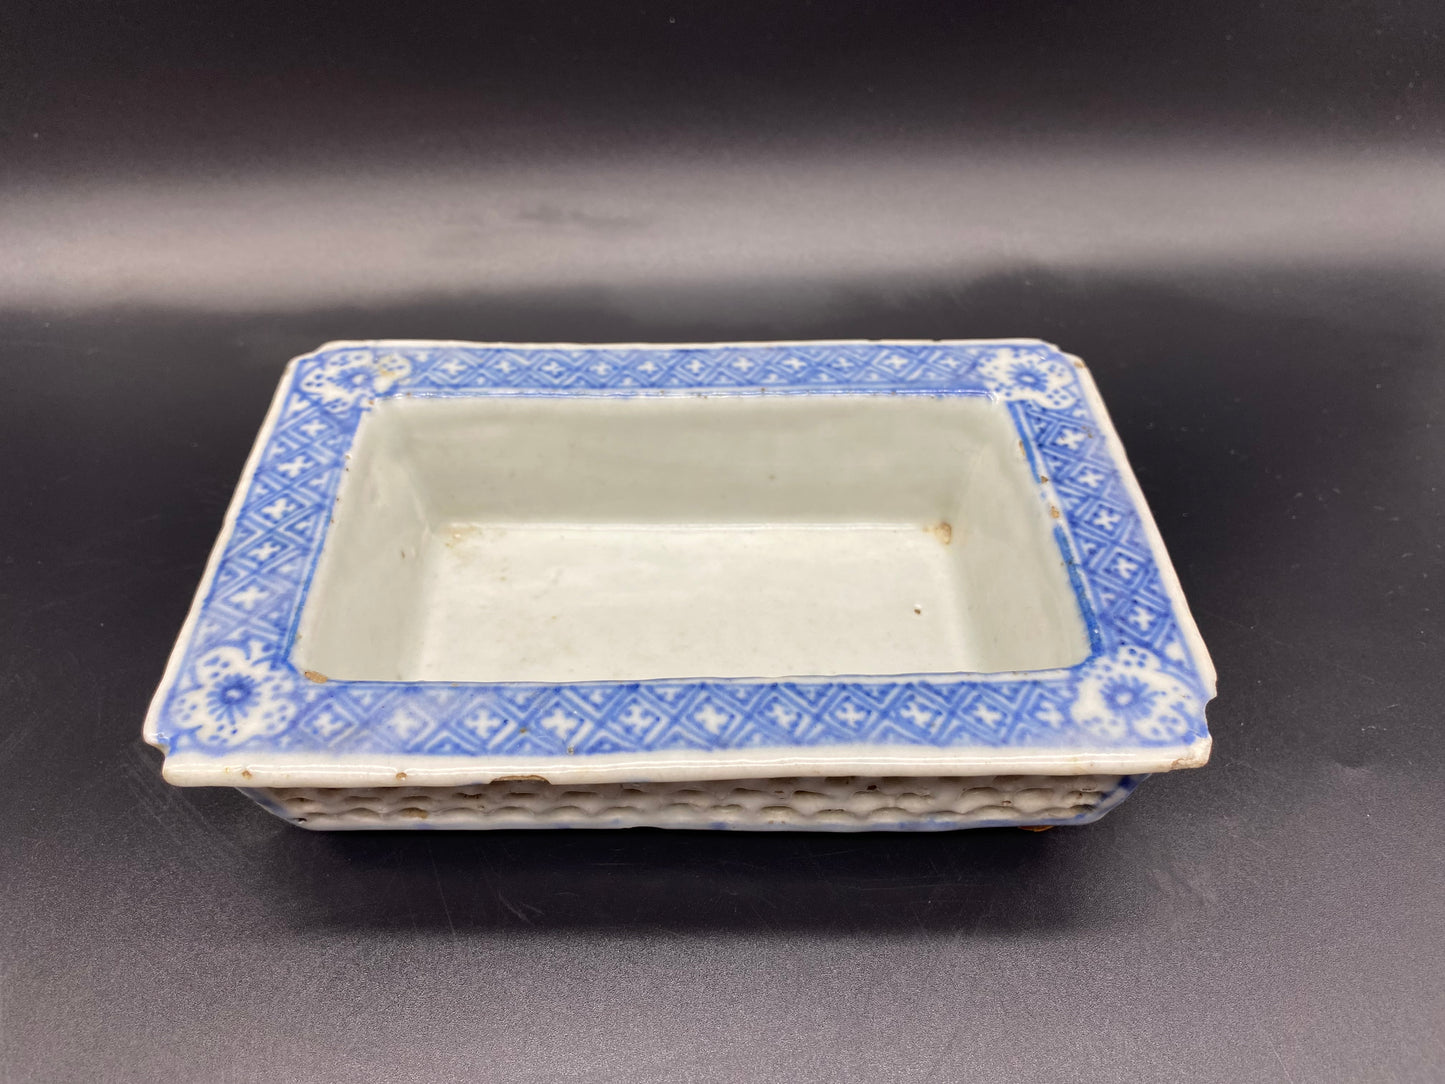 Antiques Online USA Chinese Qing Reticulated Porcelain Planter / Bonsai Tree Pot